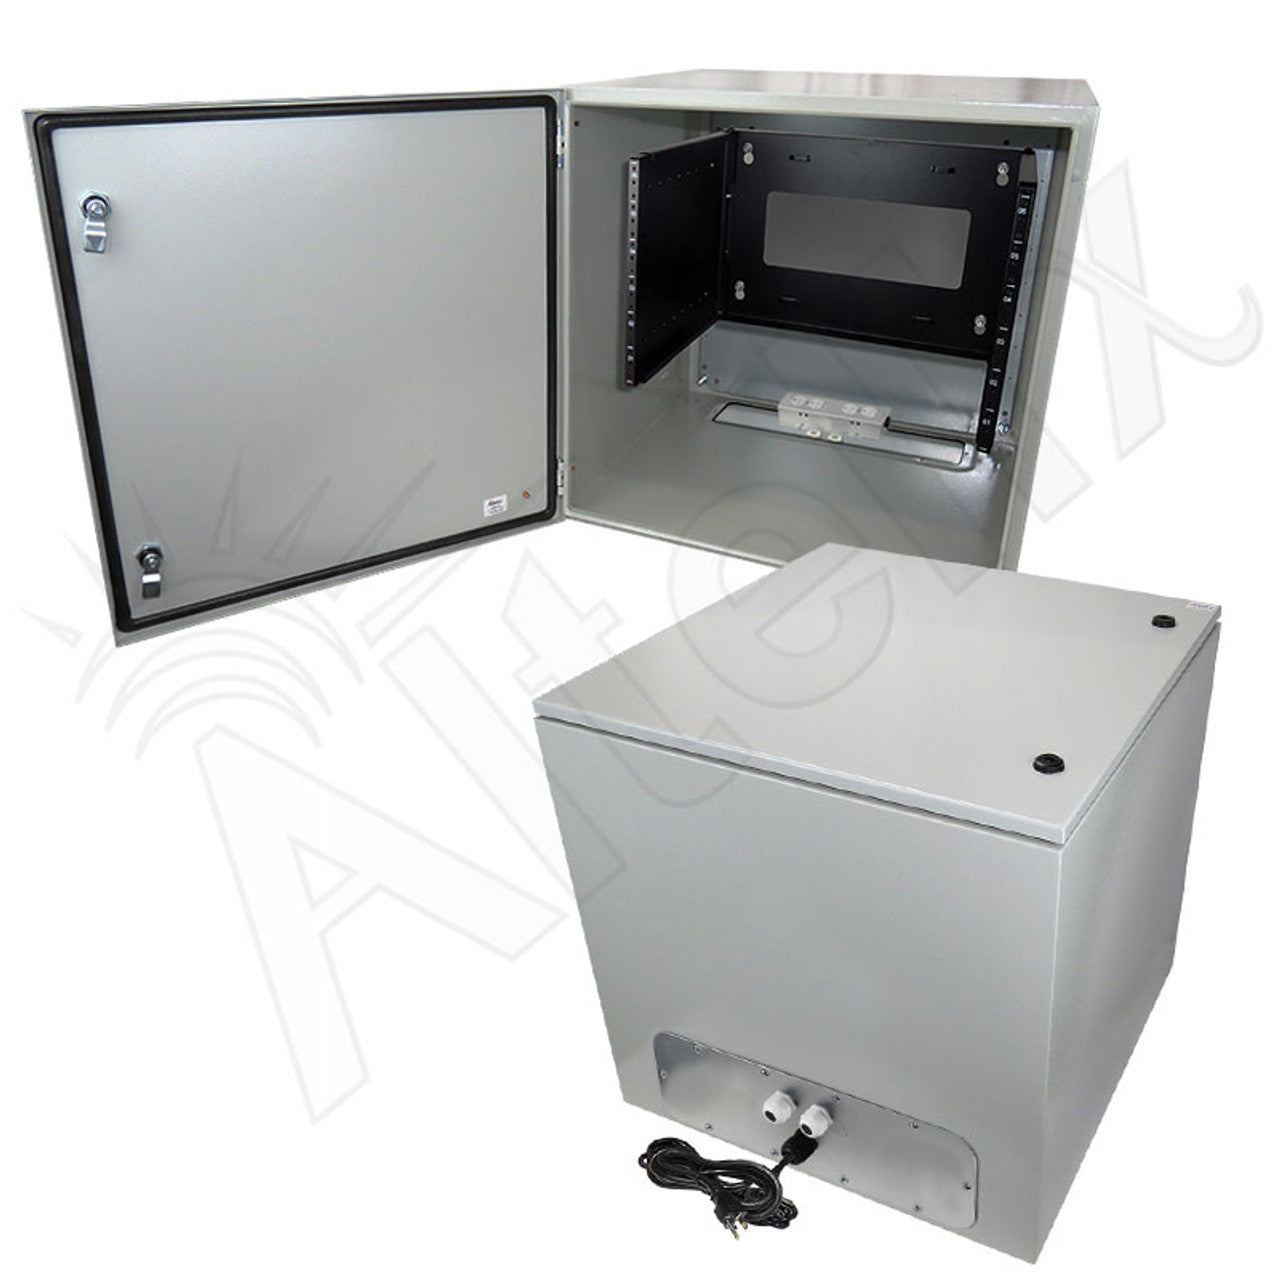 Altelix 120VAC 20A Steel NEMA 4X Enclosure for UPS Power Systems with 19" Wide 6U Rack, 20A Power Outlets and Power Cord-4